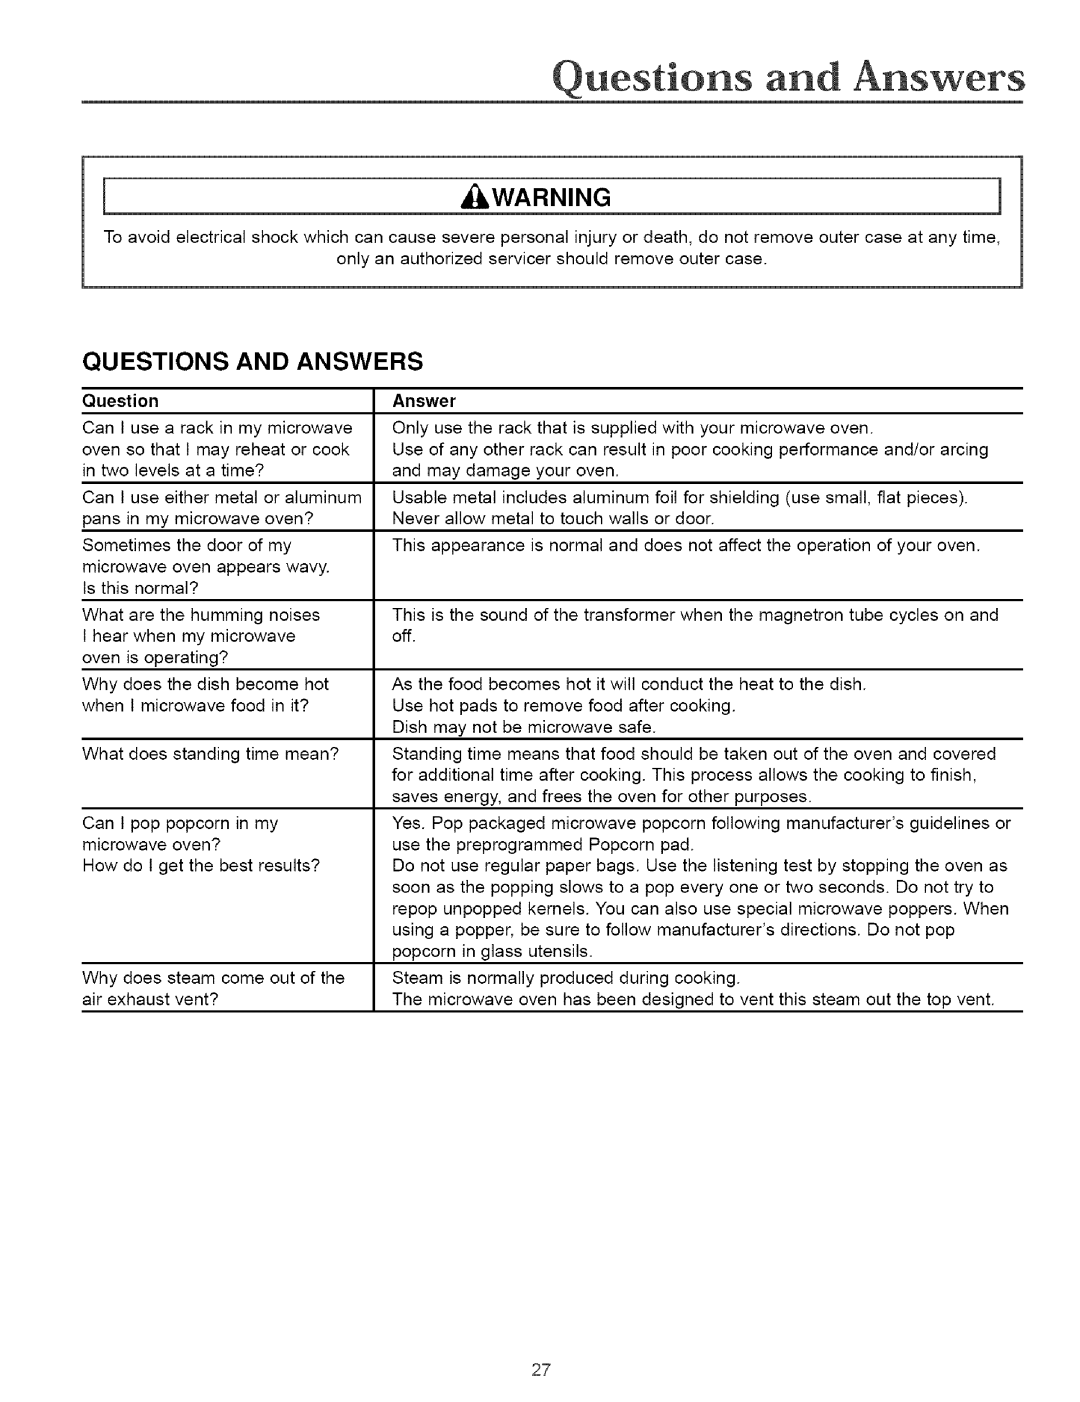 Maytag MMVS156AA owner manual Questions And Answers, WARNING1 